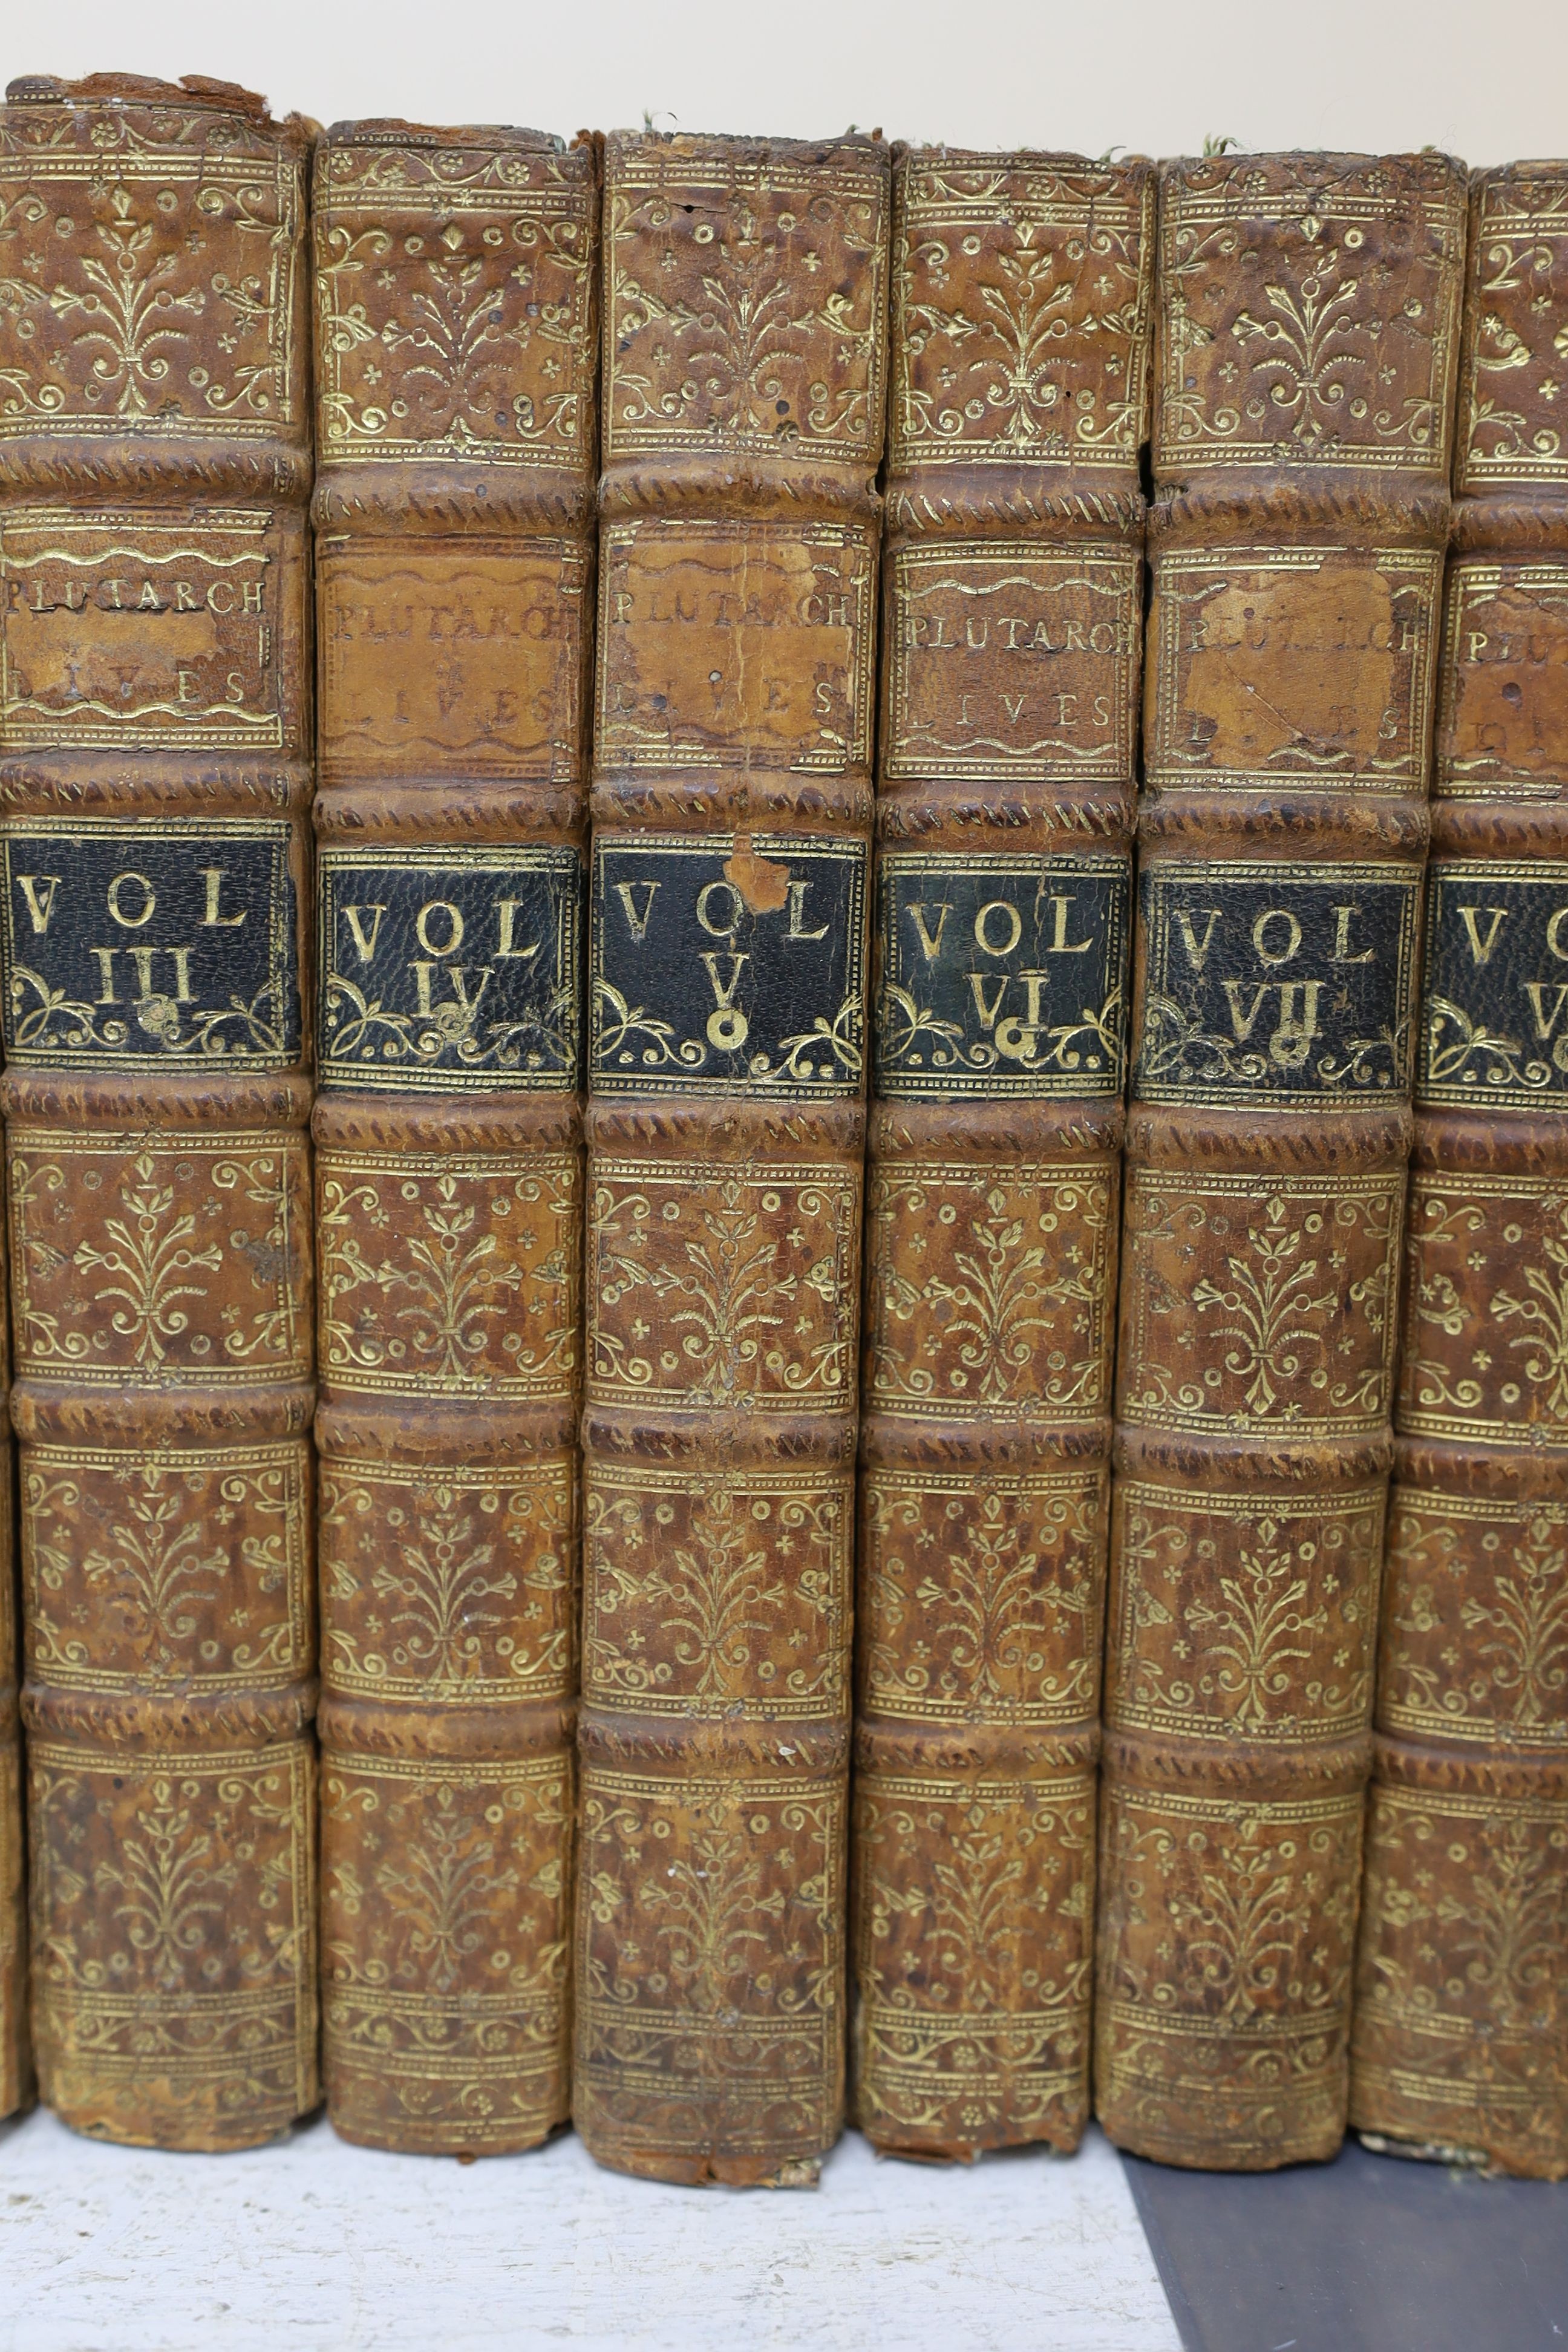 Plutarch- Lives, 8 vols, 8vo, contemporary calf, some titling labels lacking, London, 1727